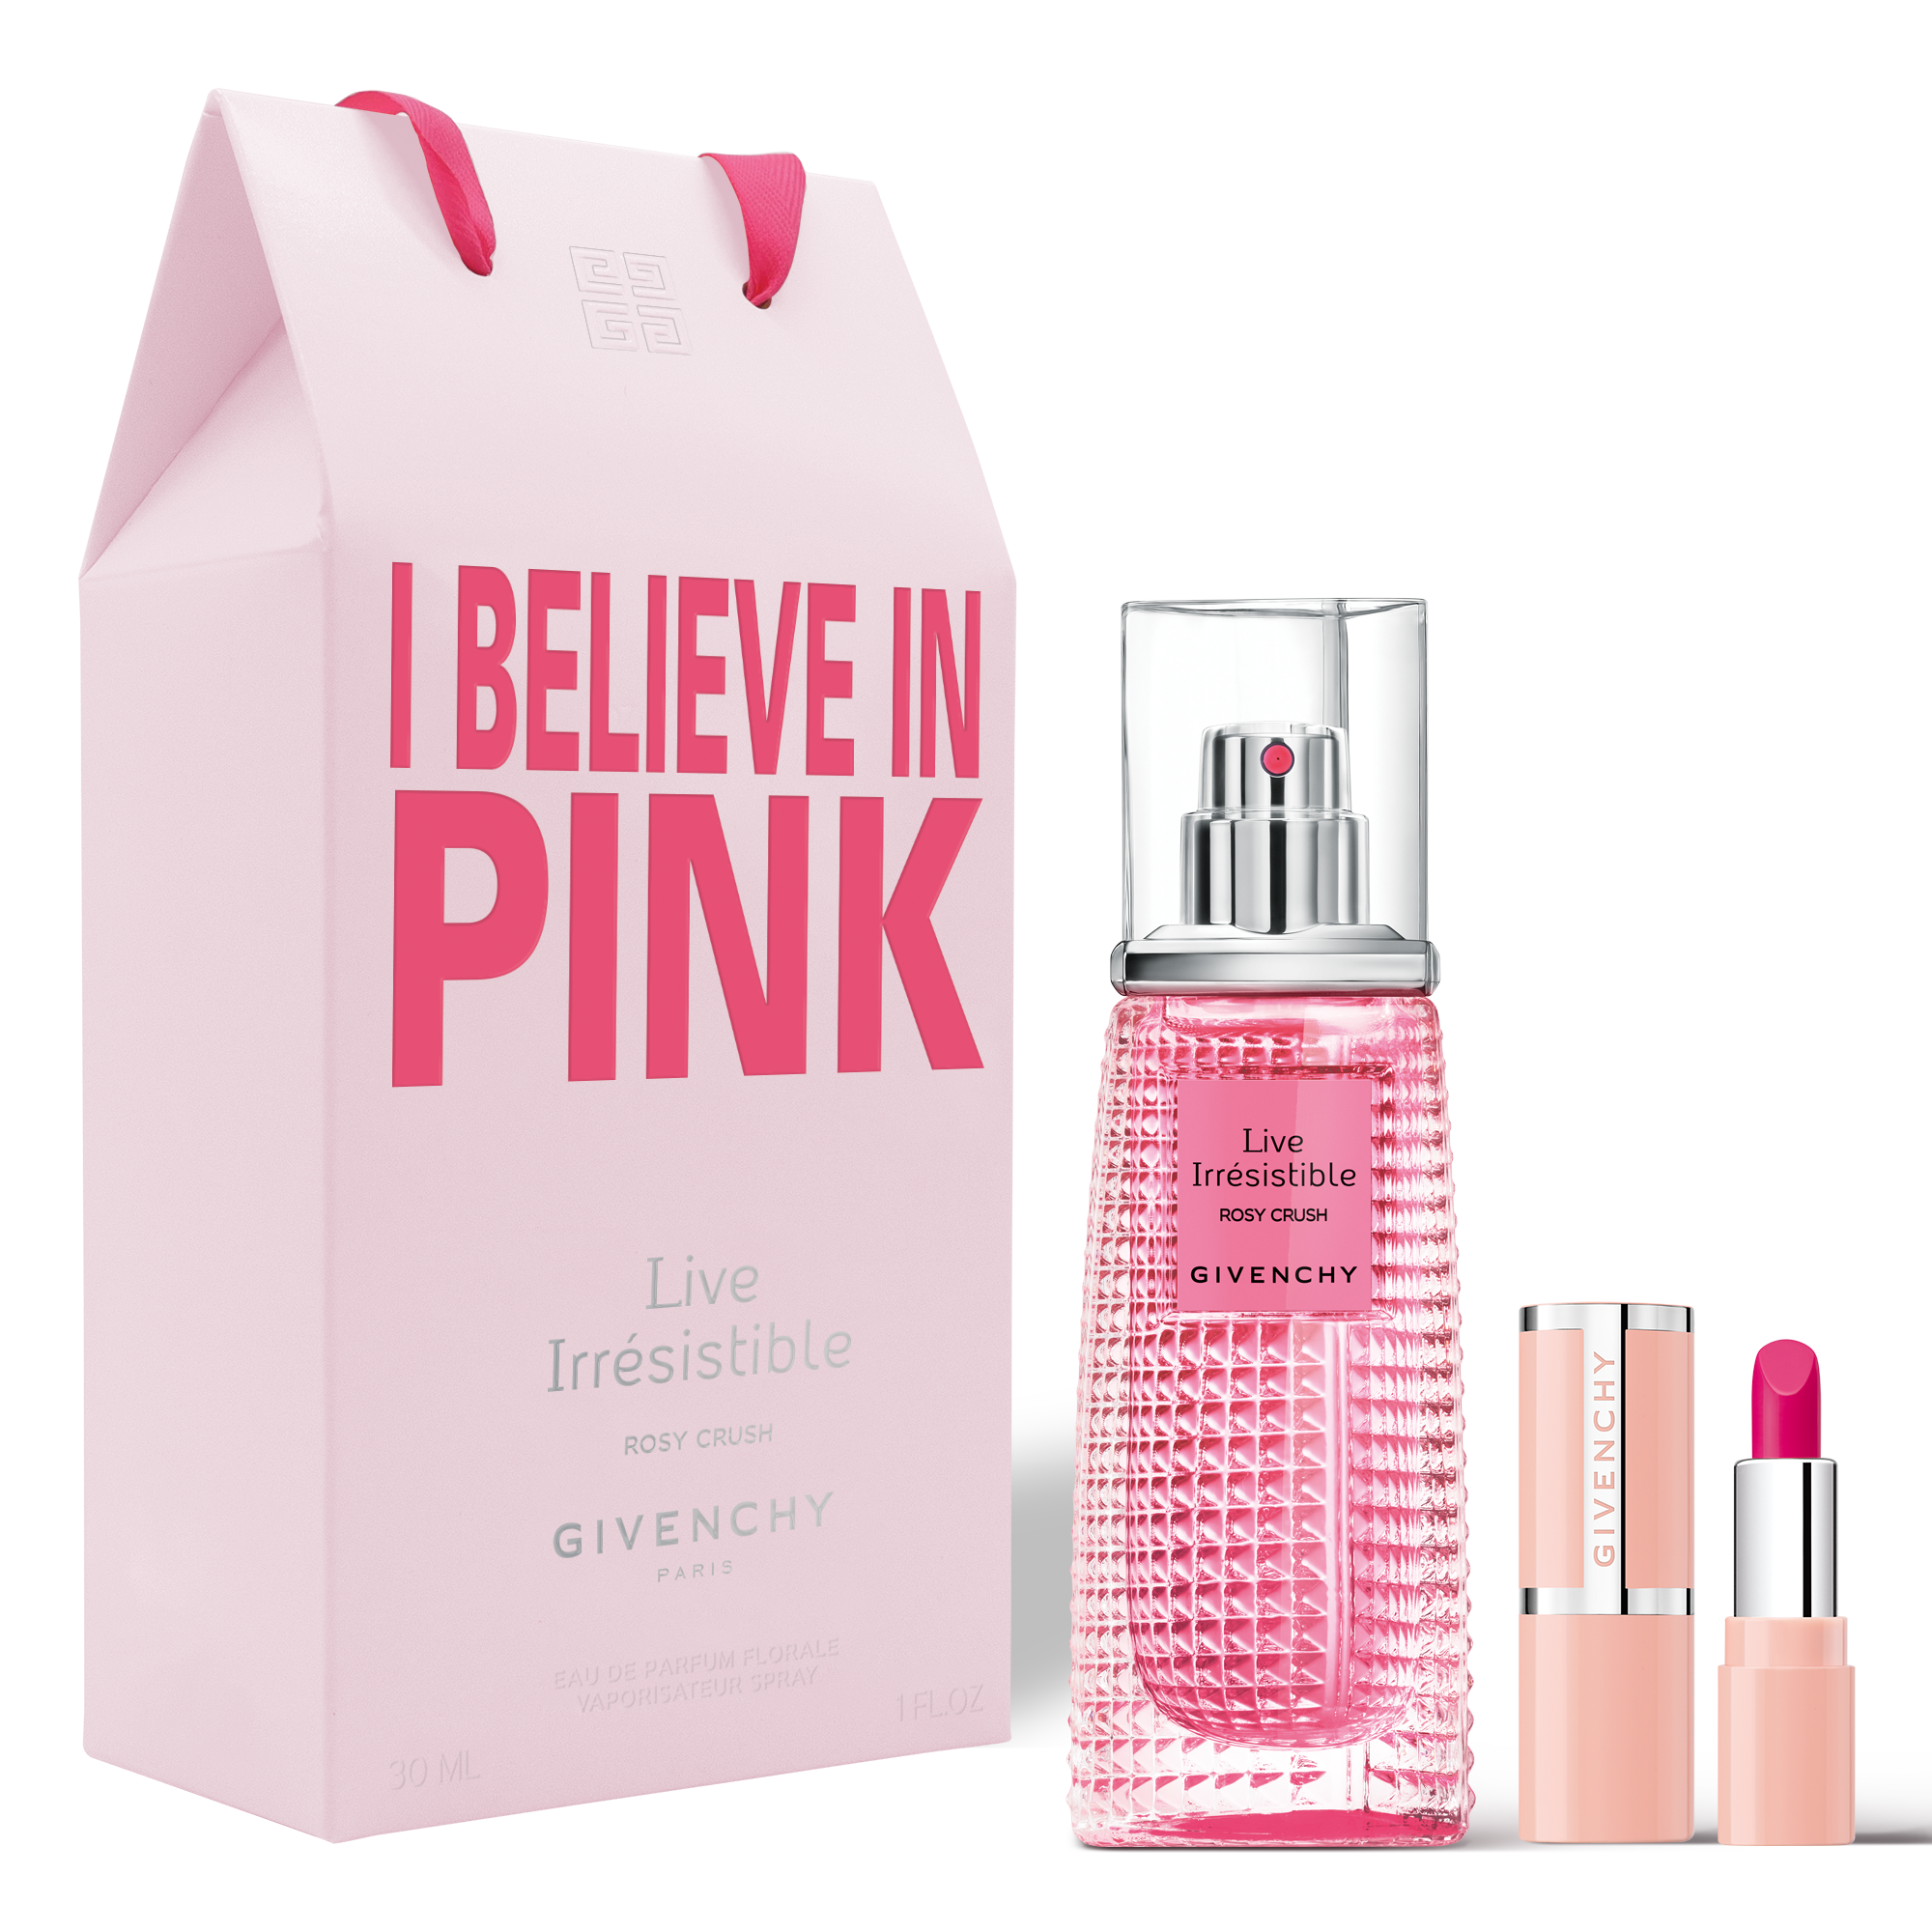 LIVE IRRÉSISTIBLE ROSY CRUSH • I Believe In Pink ∷ GIVENCHY